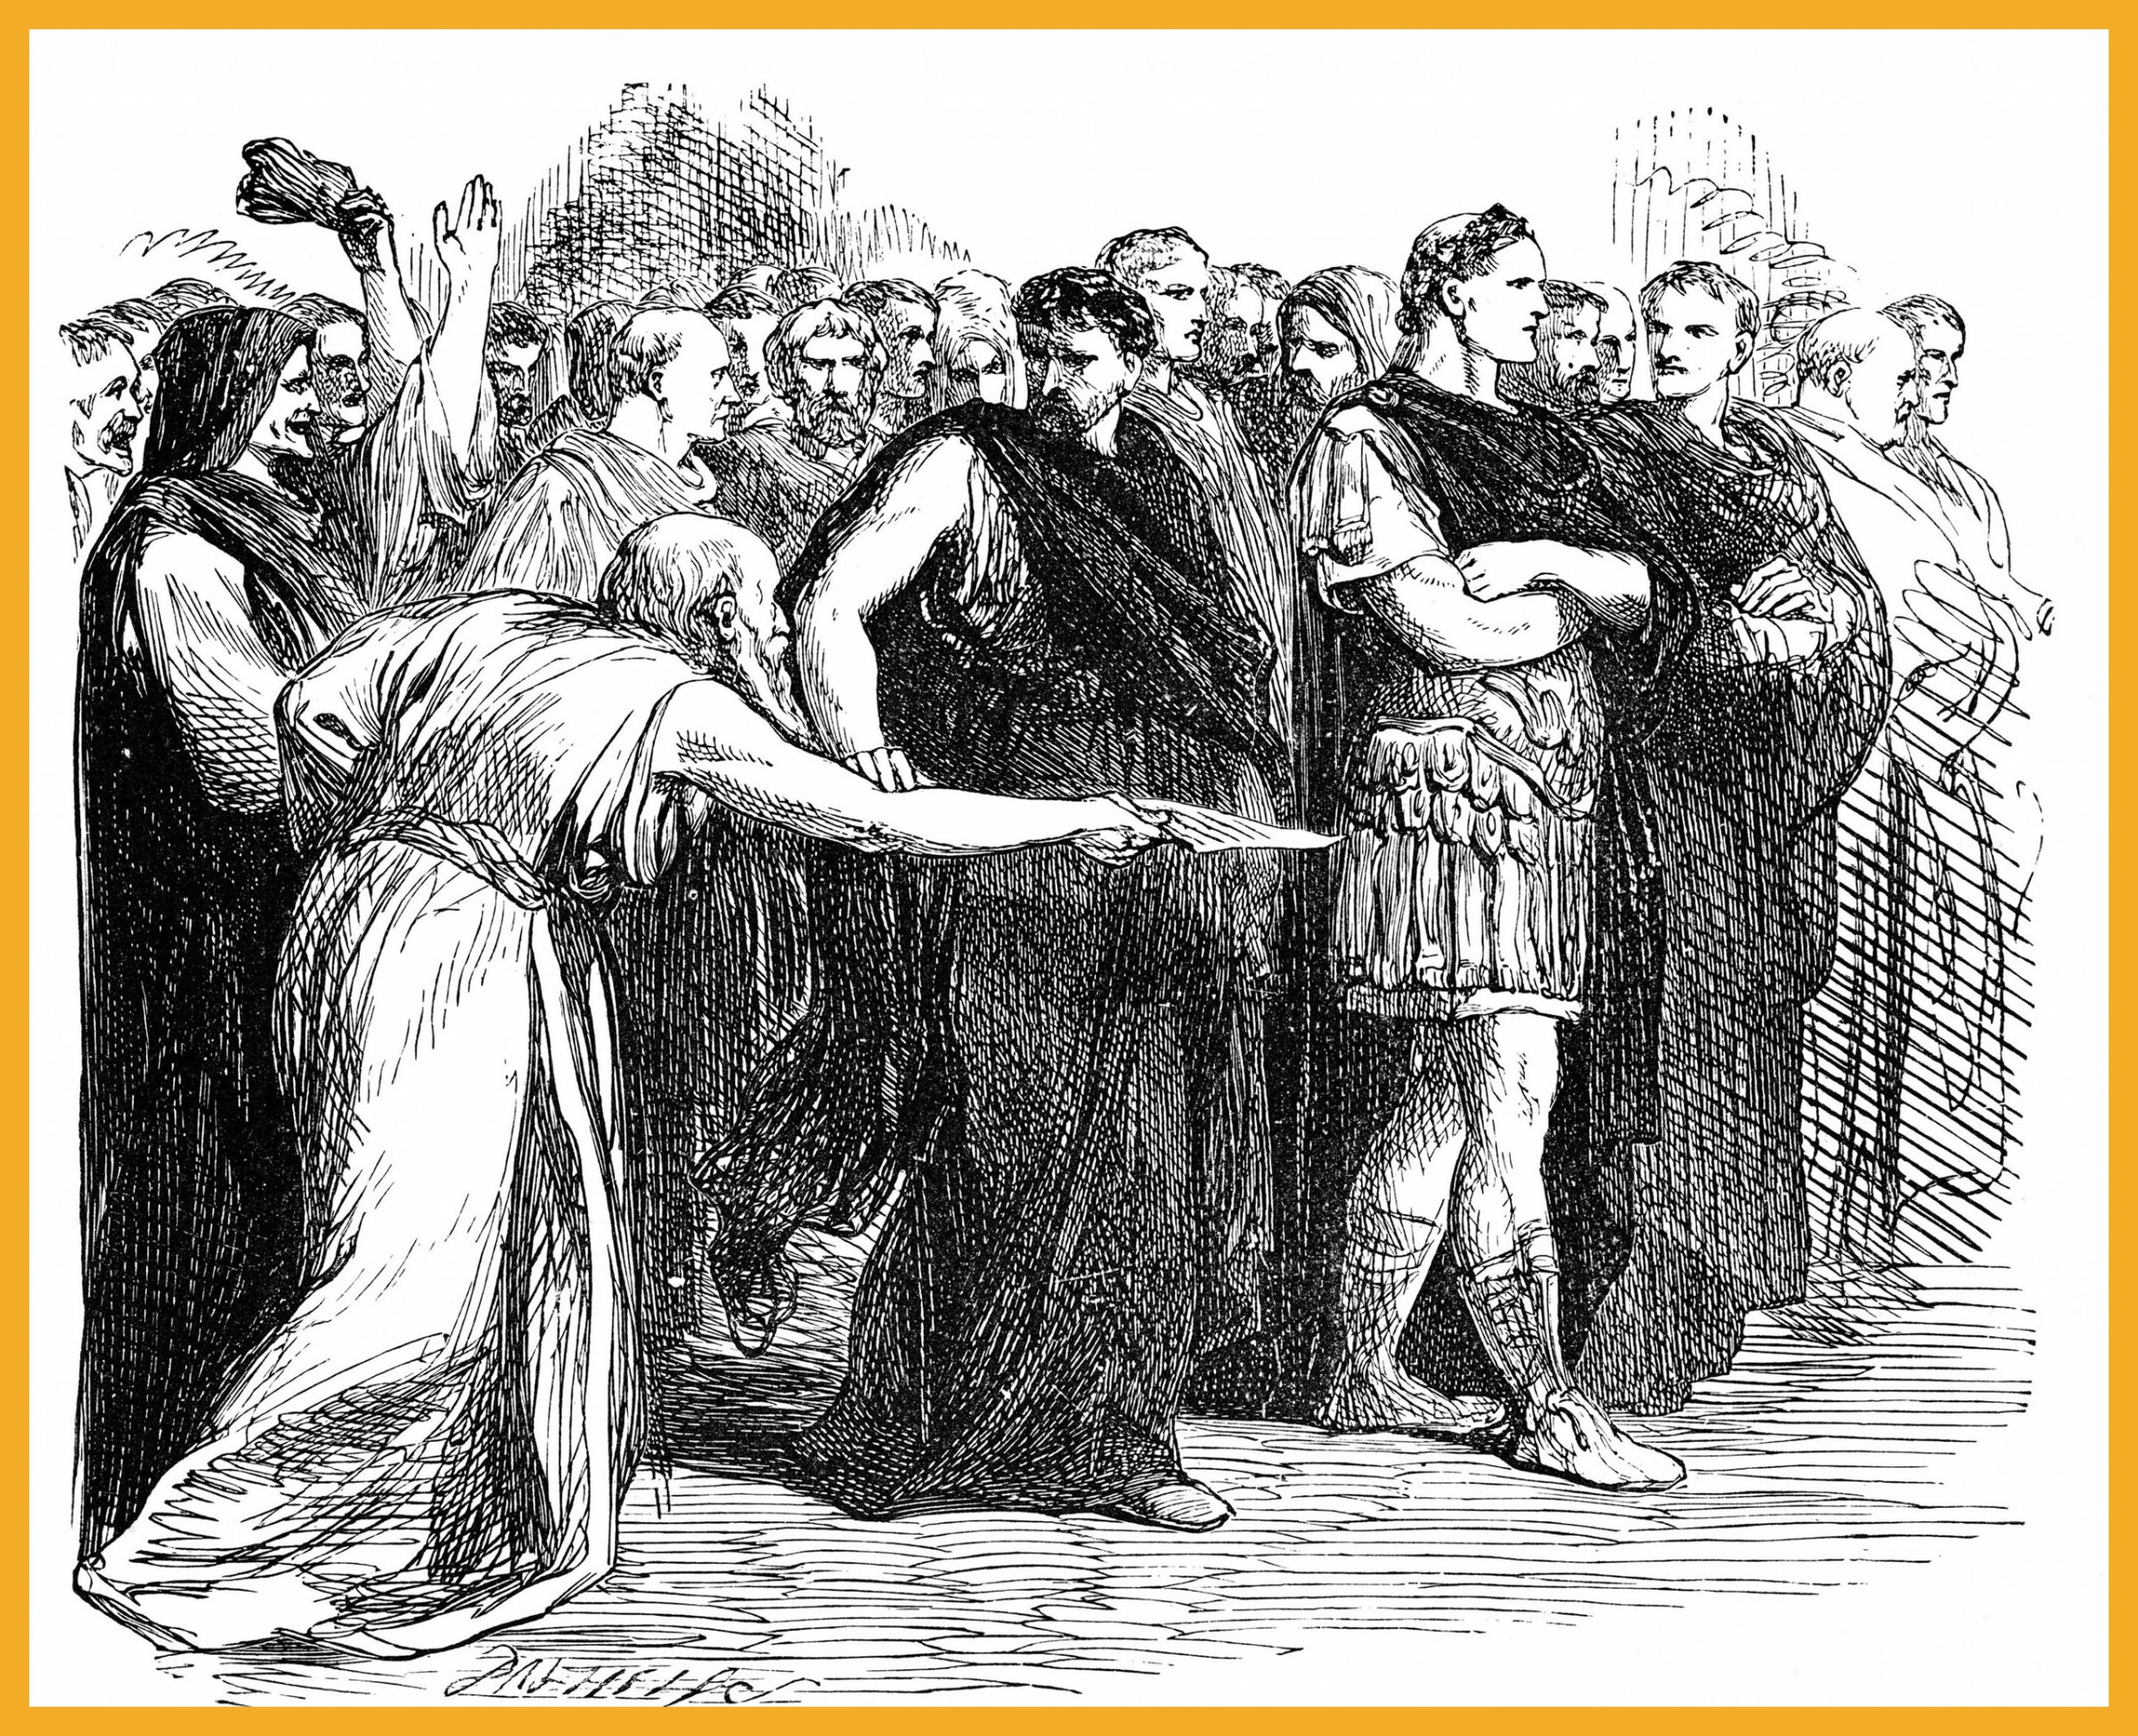 Beware the Ides of March: Soothsayer warning Julius Caesar of the Ides of March - the day on which he was assassinated. Illustration for Julius Caesar from an edition of William Shakespeare's works published 1858. Wood engraving